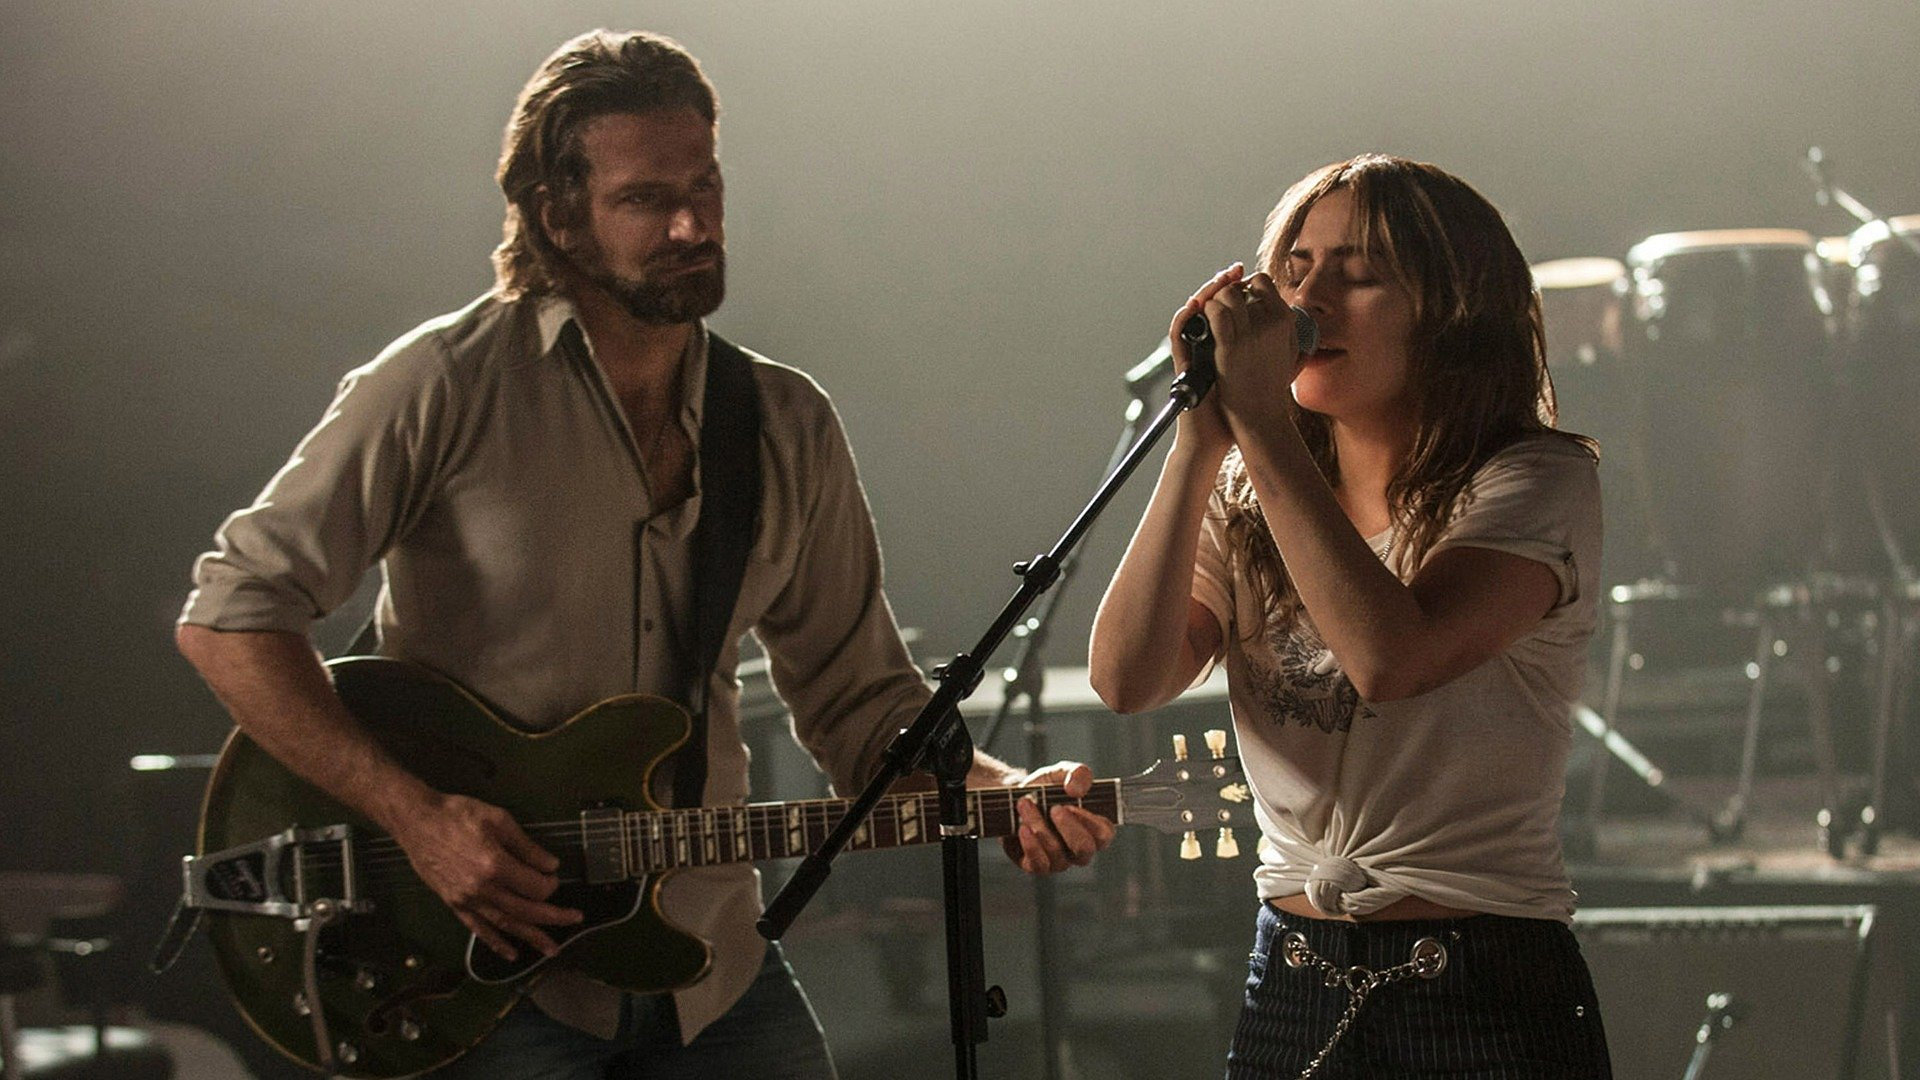 A Star is born: Shallow